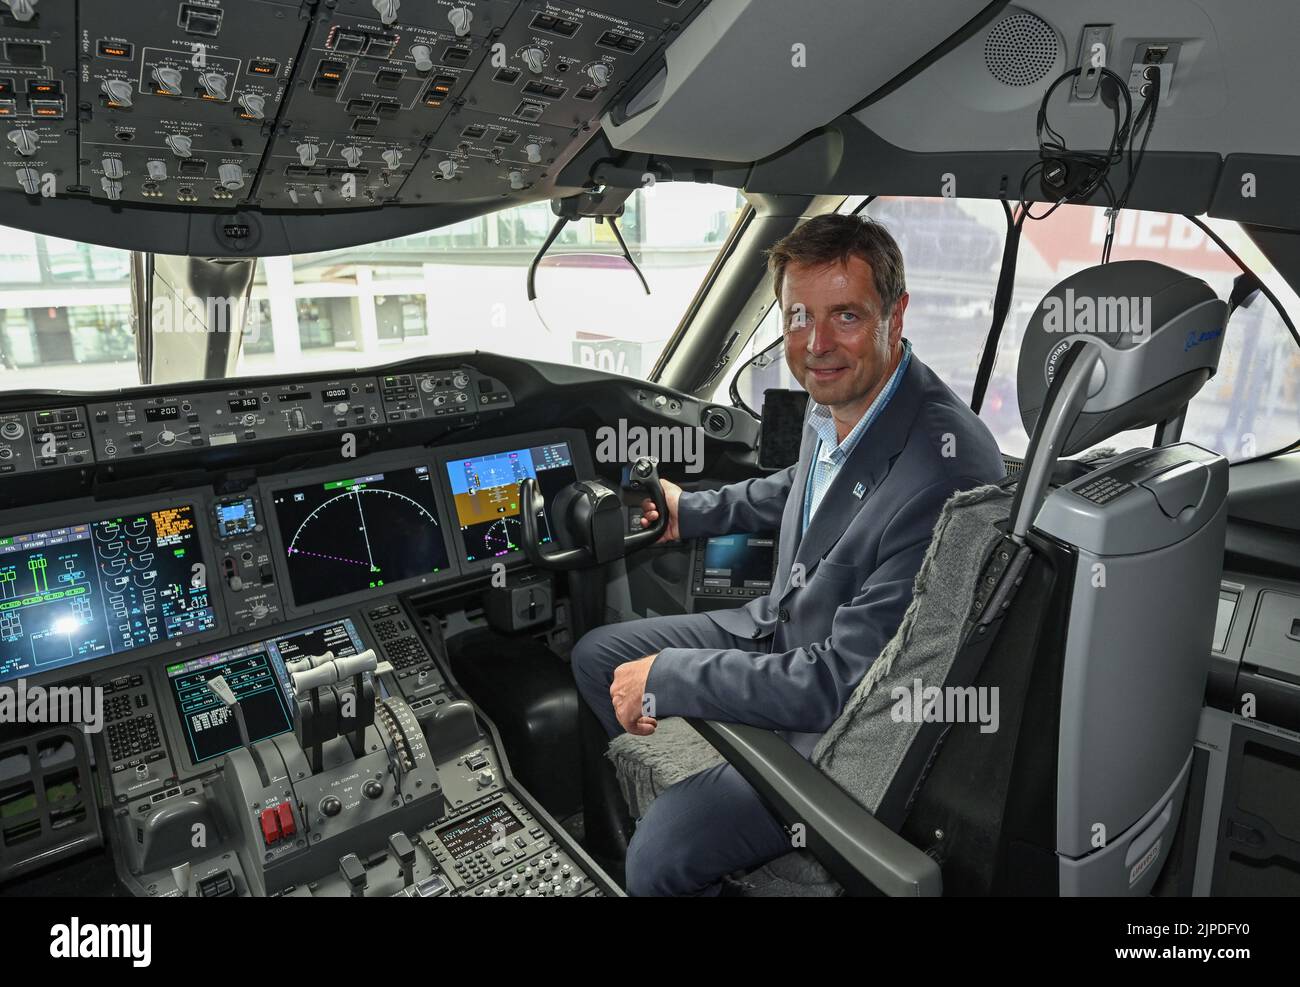 17 August 2022, Brandenburg, Schönefeld: Björn Tore Larsen, CEO of Norse Atlantic Airways, sits in the cockpit of a Boeing 787 Dreamliner before the inaugural flight from the capital's BER Airport to New York (JFK). The airline Norse Atlantic Airways will launch its inaugural flight from BER Airport to New York (JFK) on August 17. Photo: Patrick Pleul/dpa Stock Photo